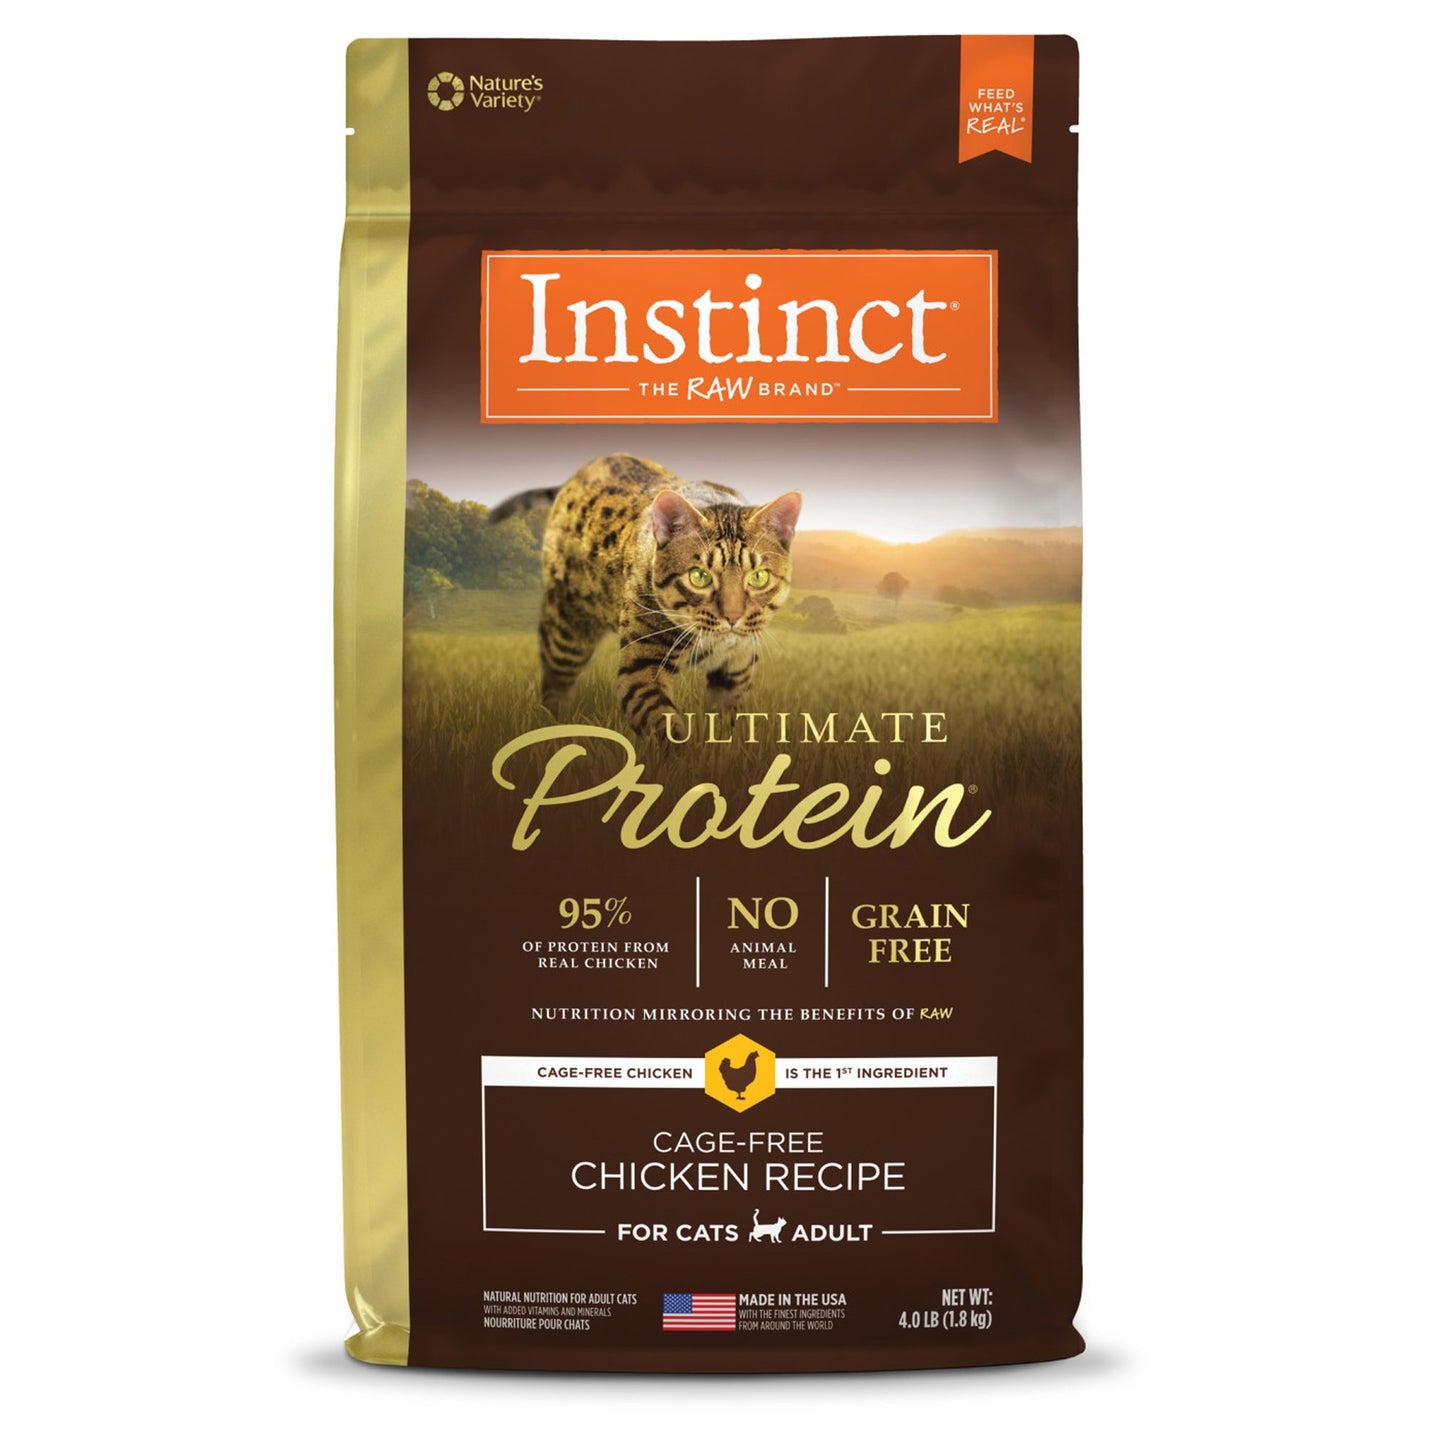 Natures Variety Instinct Cat Ultimate Protein Chicken 4Lb Cagefree (Case of 4)